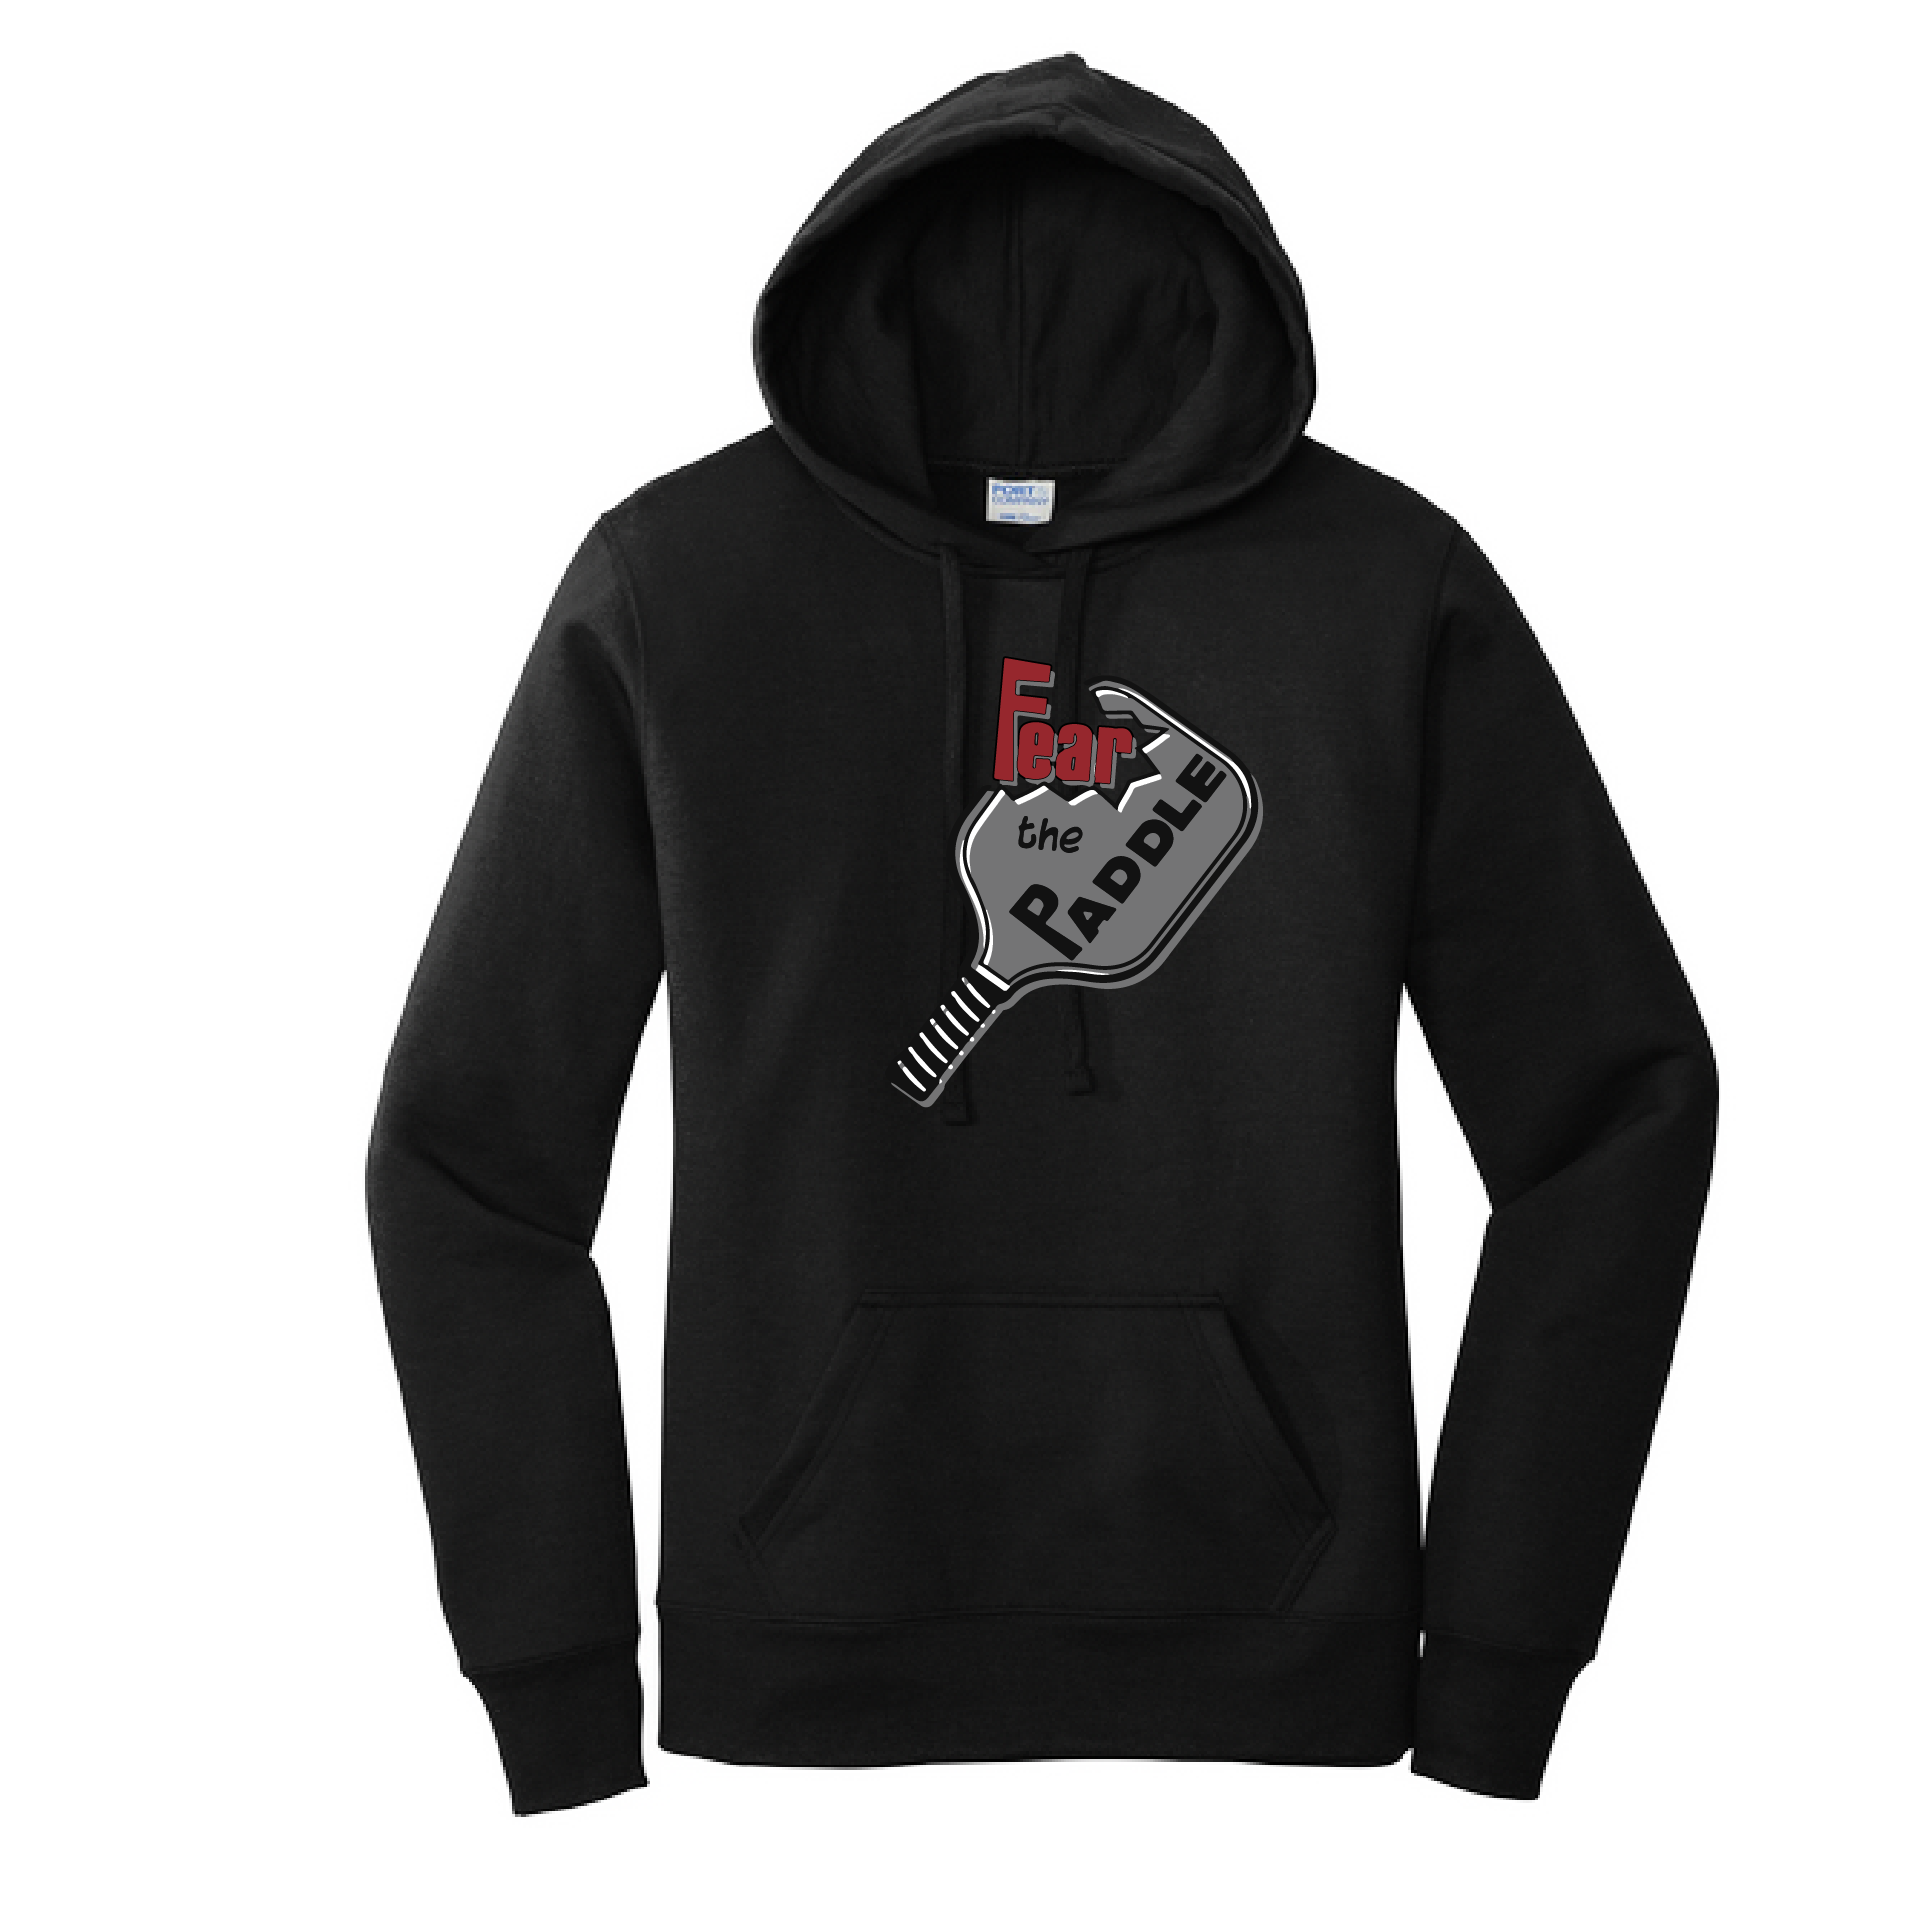 Pickleball Design: Fear the Paddle  Women's Hooded pullover Sweatshirt  Turn up the volume in this Women's Sweatshirts with its perfect mix of softness and attitude. Ultra soft lined inside with a lined hood also. This is fitted nicely for a women's figure. Front pouch pocket.